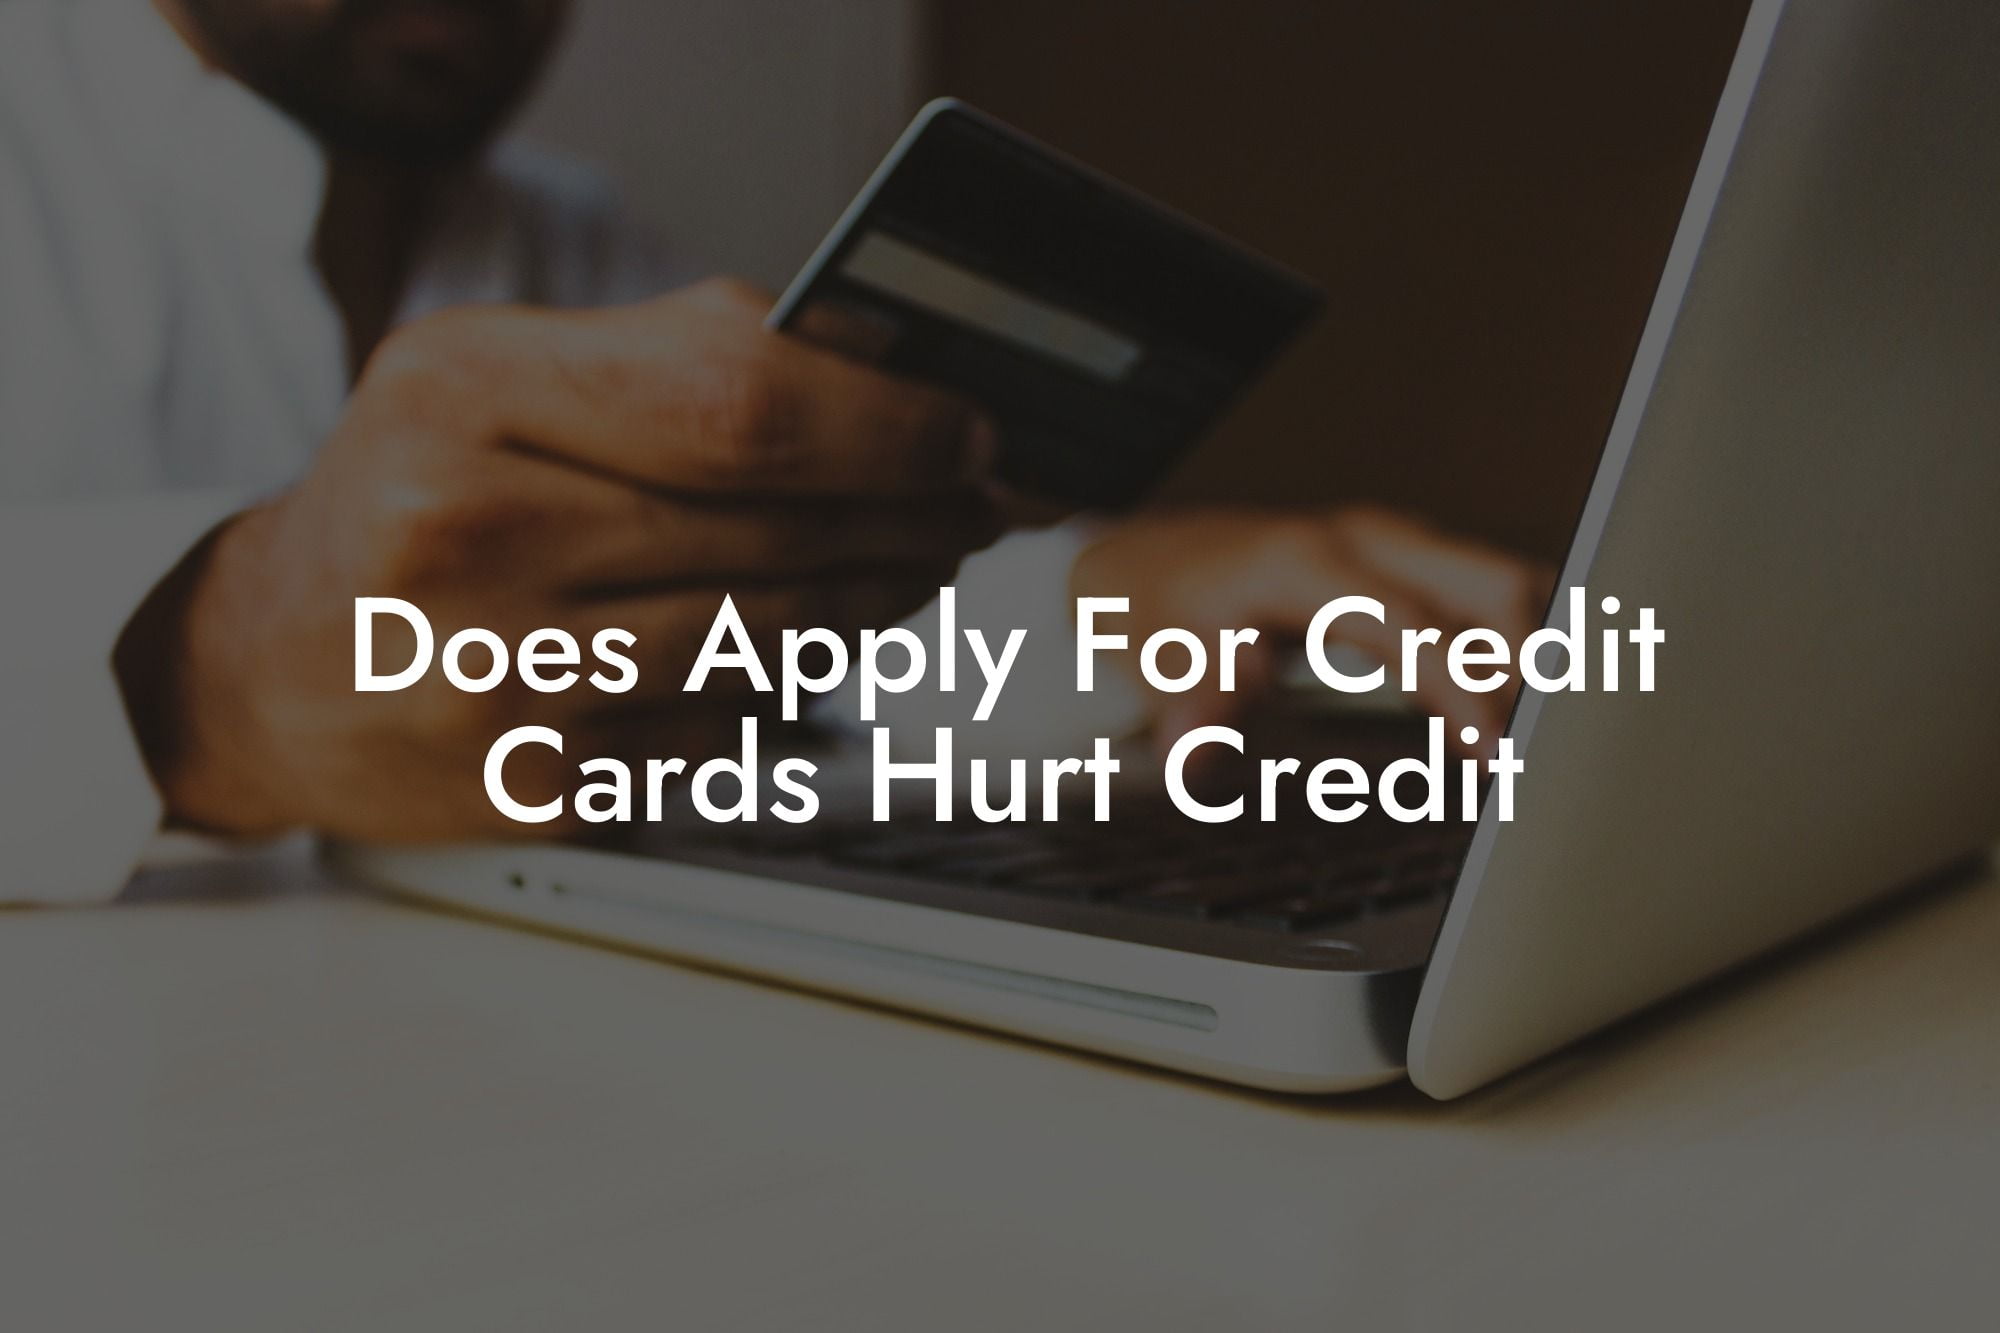 Does Apply For Credit Cards Hurt Credit